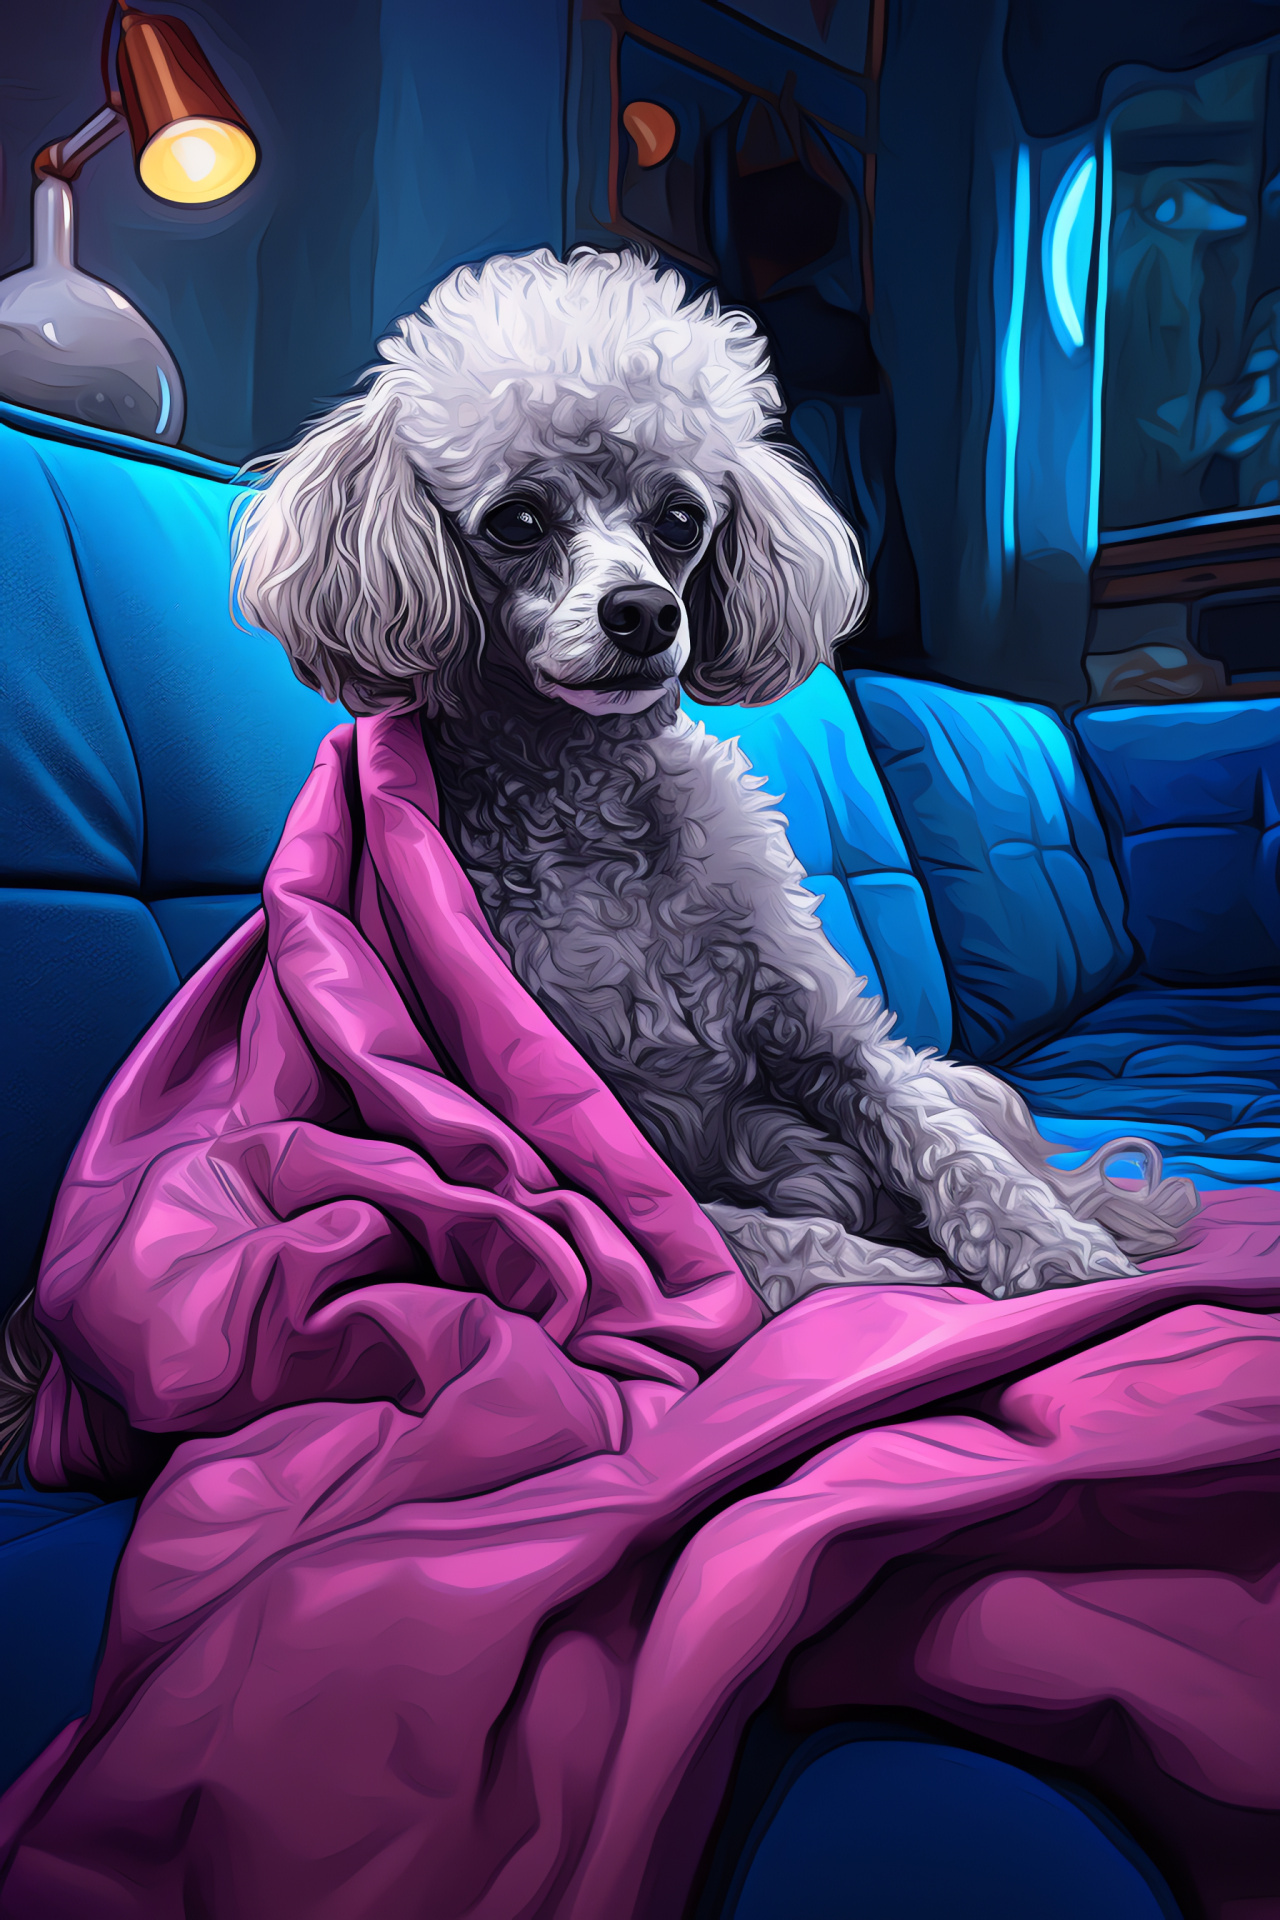 Poodle, Elegant stylish dog, Curly luxurious fur, Sophisticated pet on plush furniture, Intelligent breed with classic haircut, HD Phone Wallpaper